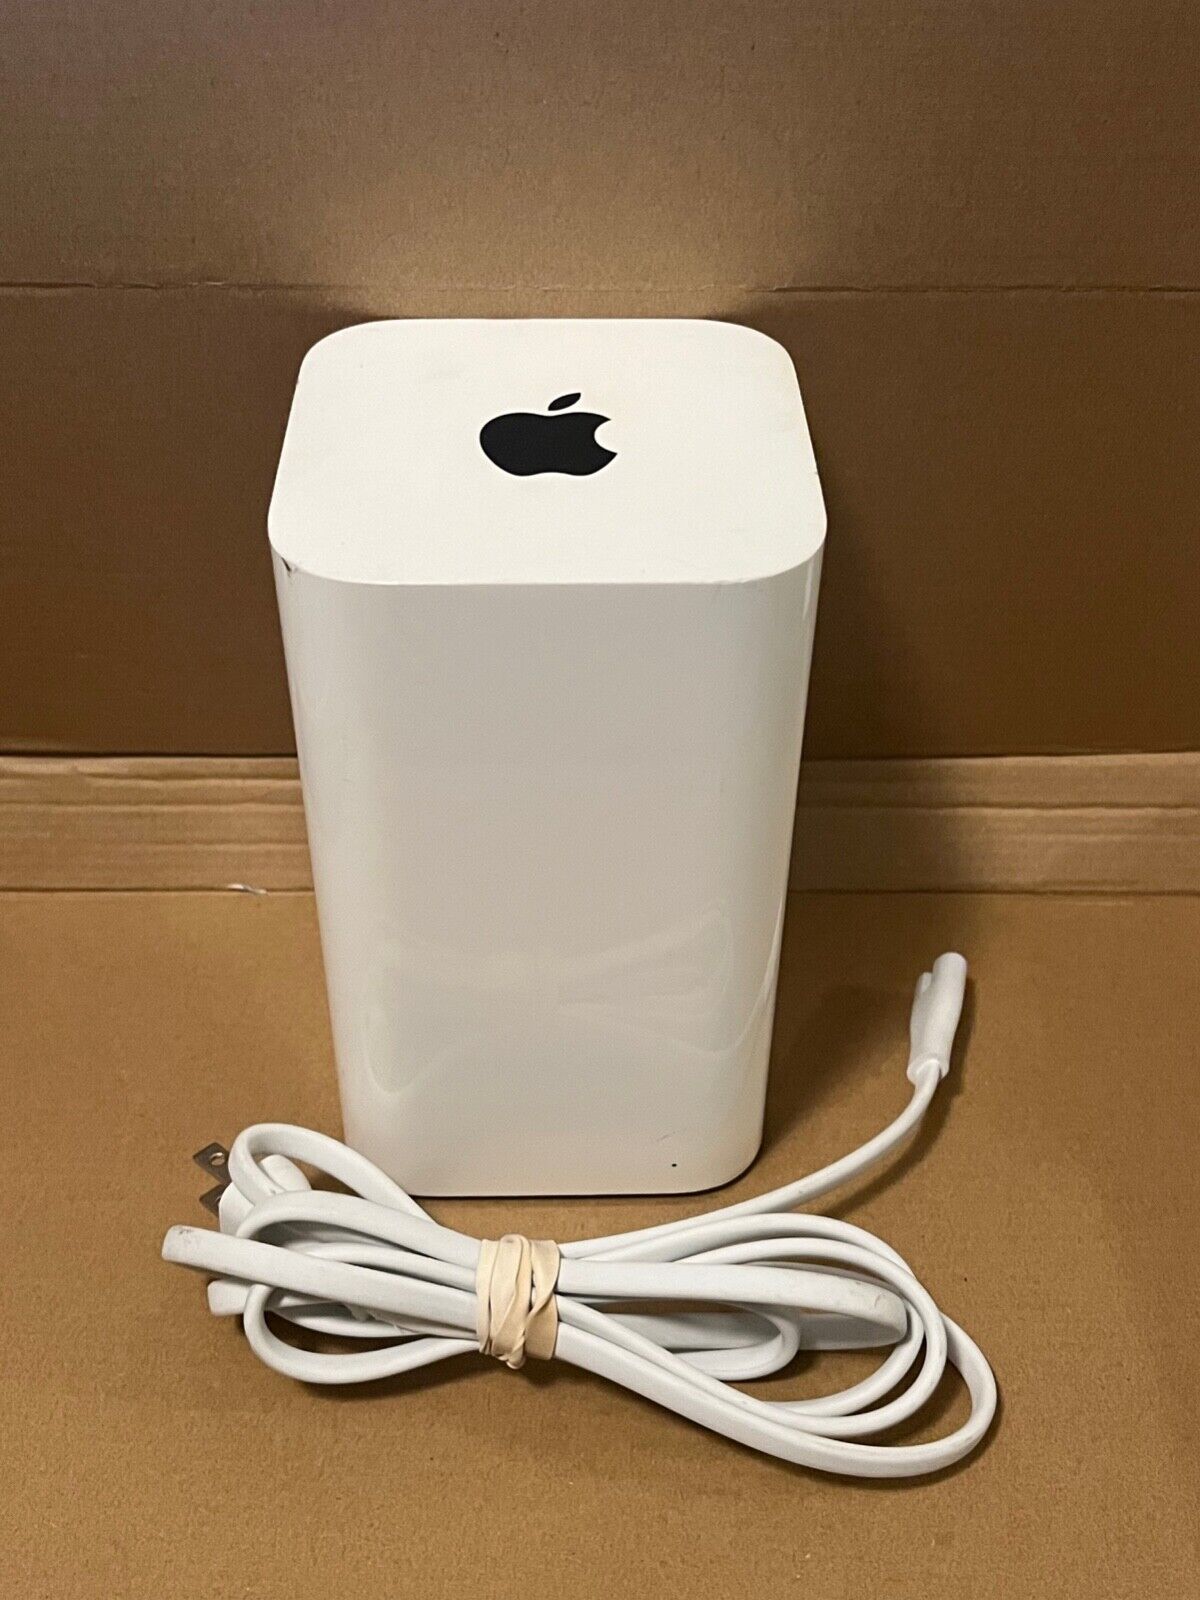 Apple AirPort Time Capsule 802.11ac Wireless Router w/USB, 2TB HDD A1470